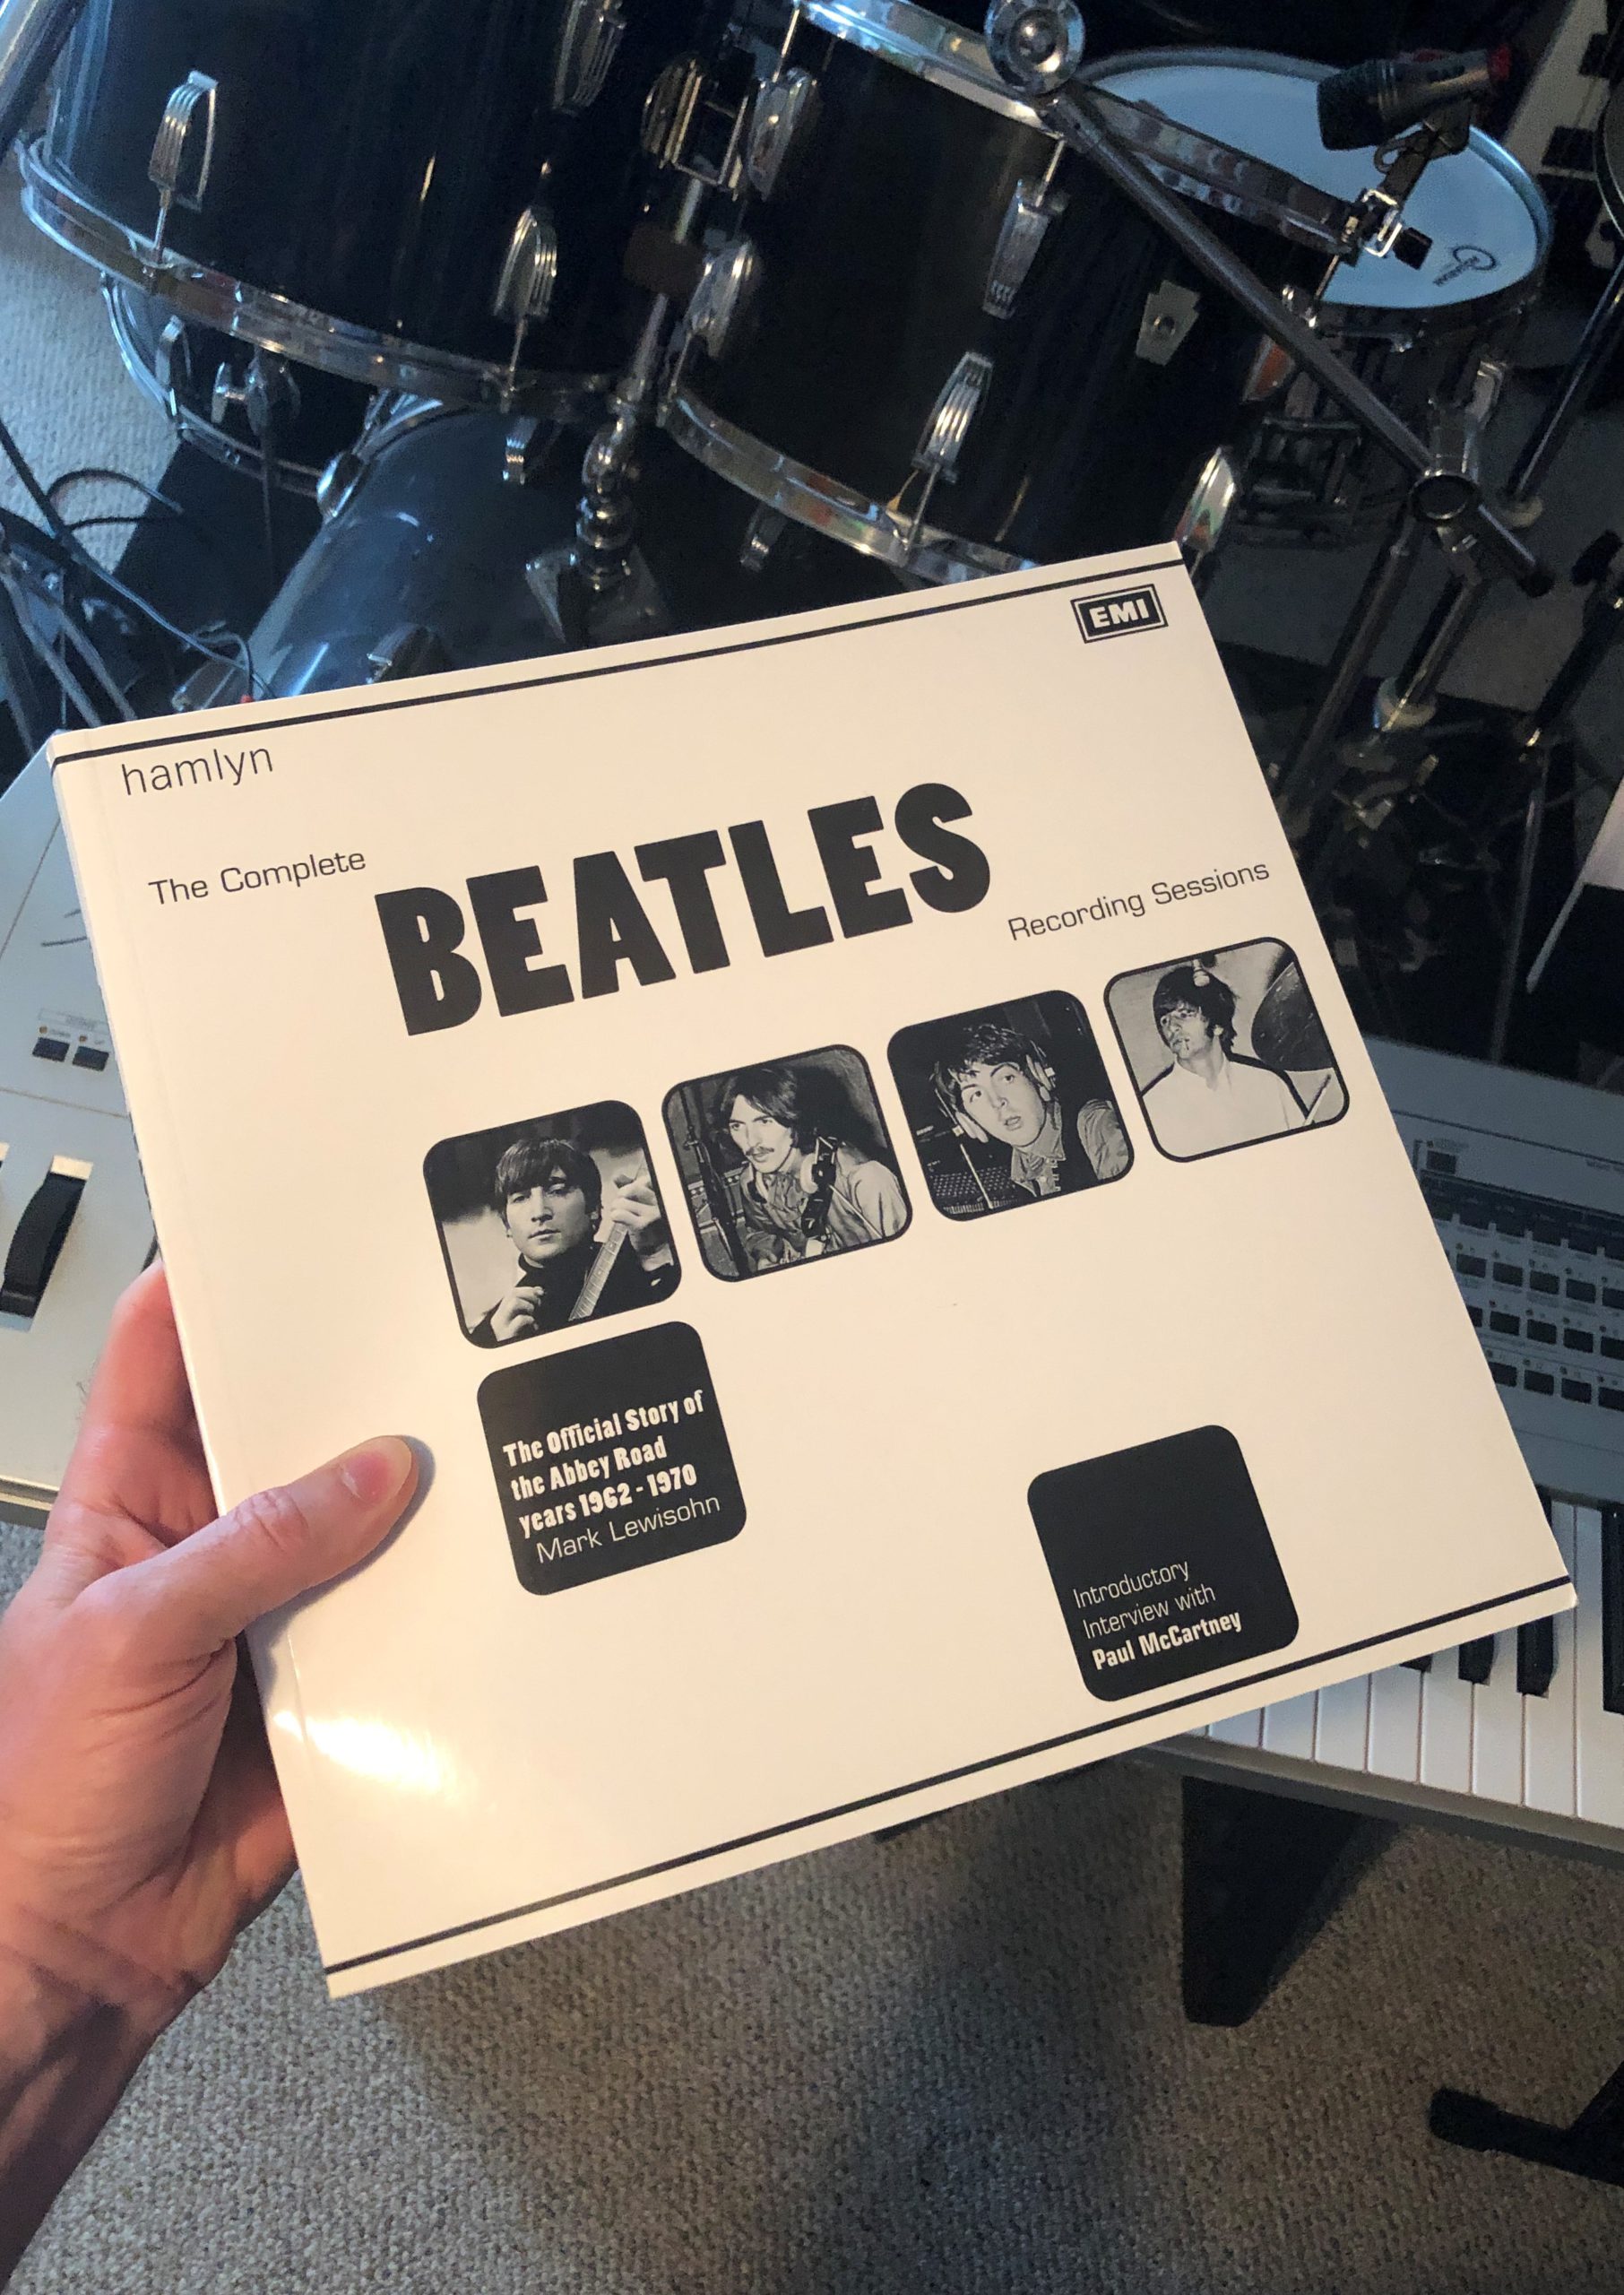 Beatles Session notes